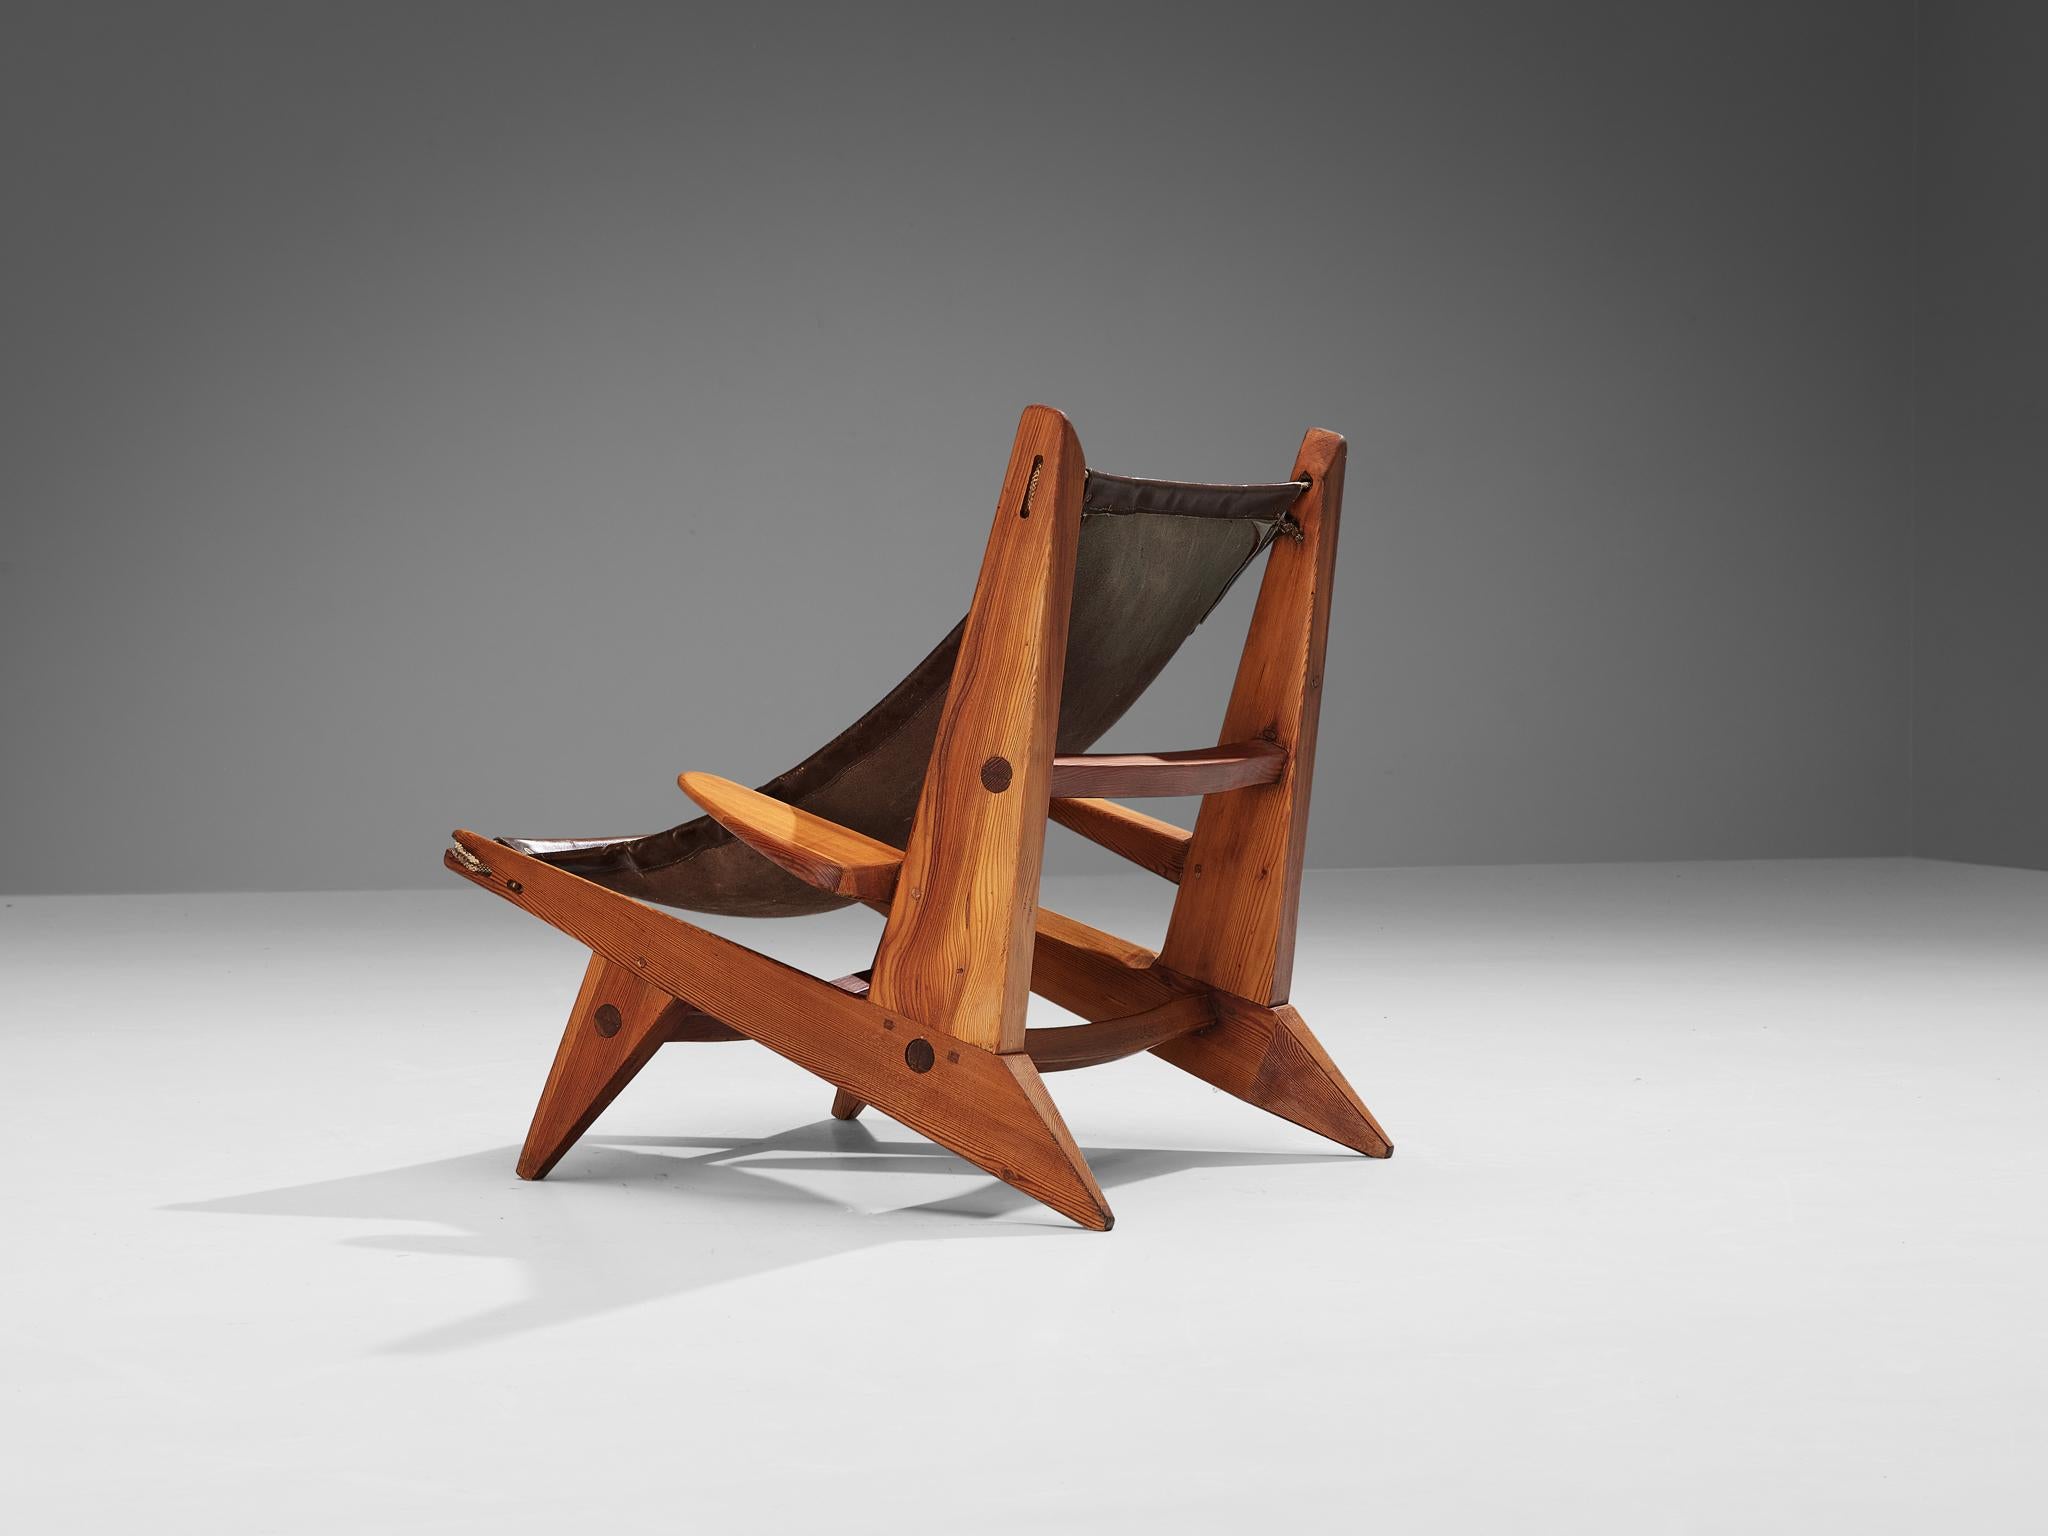 Hunting chair, leather, pine, France, 1950s

This French hunting chair features a wonderful design and detailing. The chairs are sculpturally built with a bulky touch in its execution. The pine wood is a natural grained, strong and dominant type of